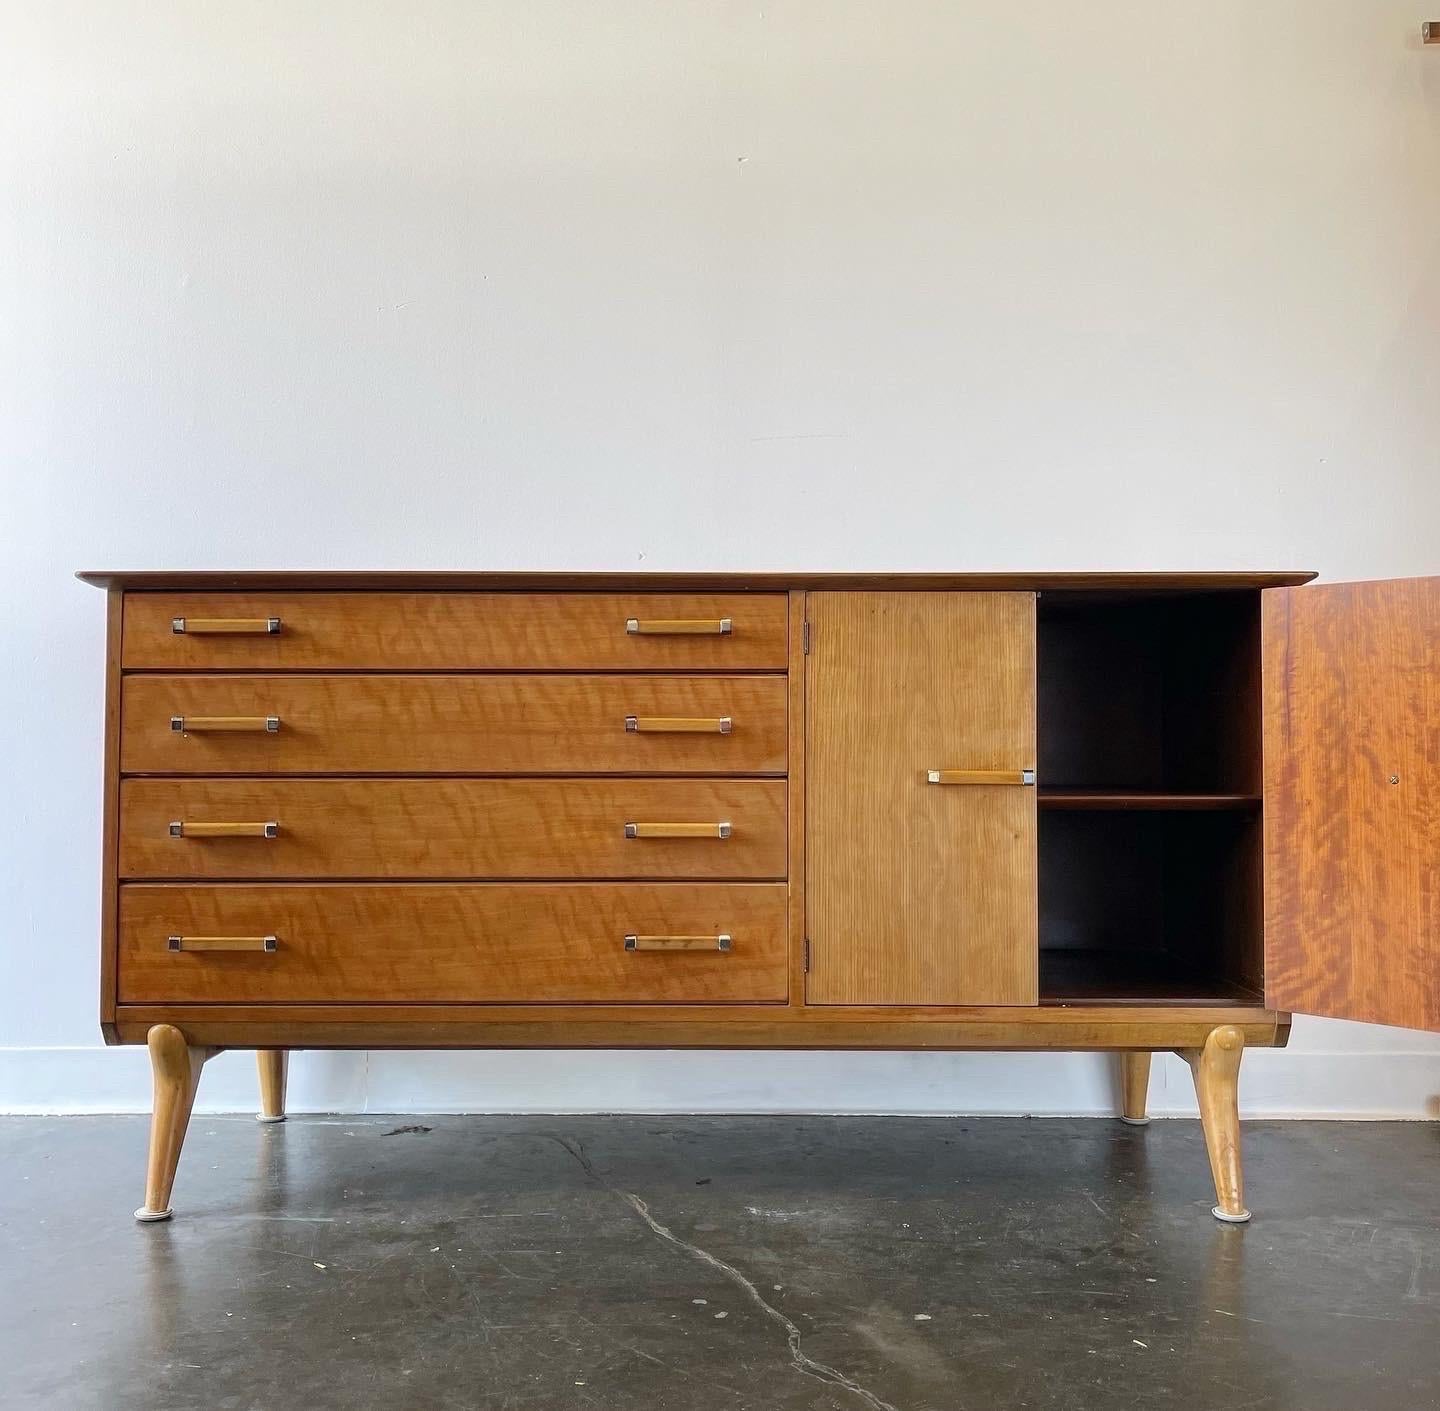 Outstanding maple credenza designed by Renzo Rutili for Johnson Furniture Company circa 1950’s.

Quality piece in excellent original condition with minimal wear. ( top light shadow, see pics )

Johnson furniture only produced the highest of